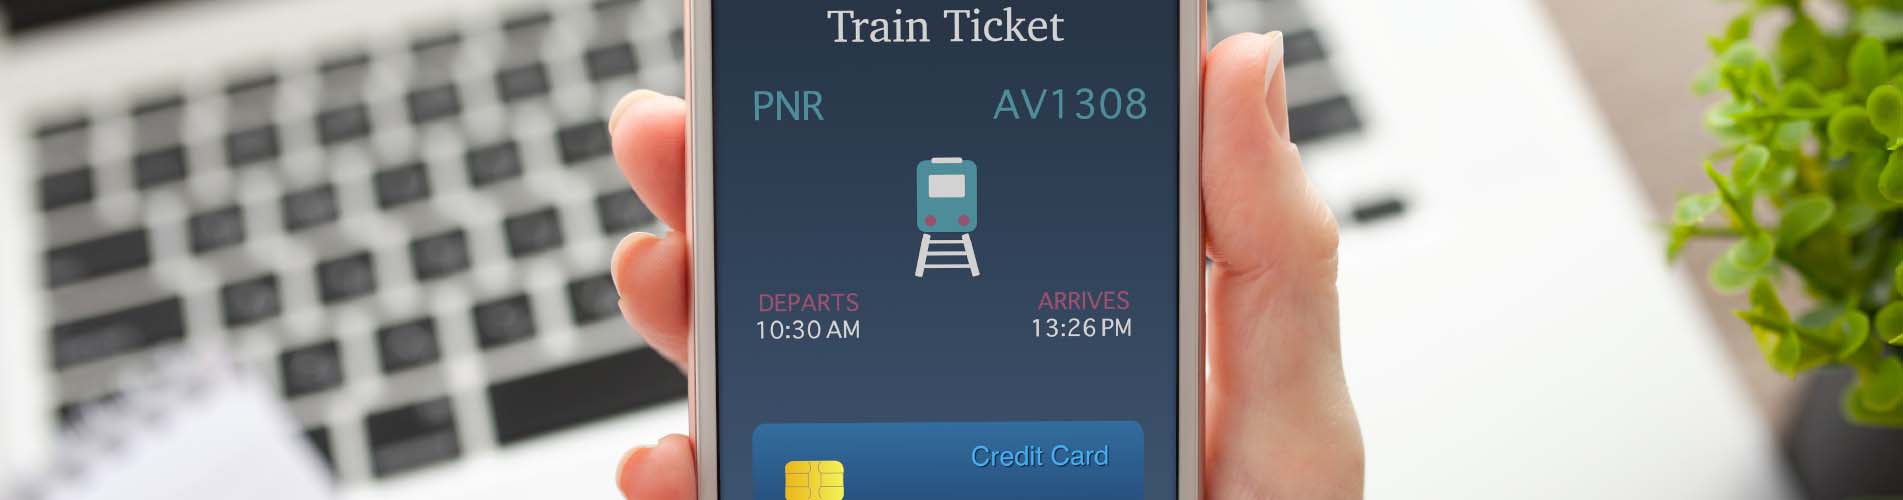 Purchase of a train ticket via an online app